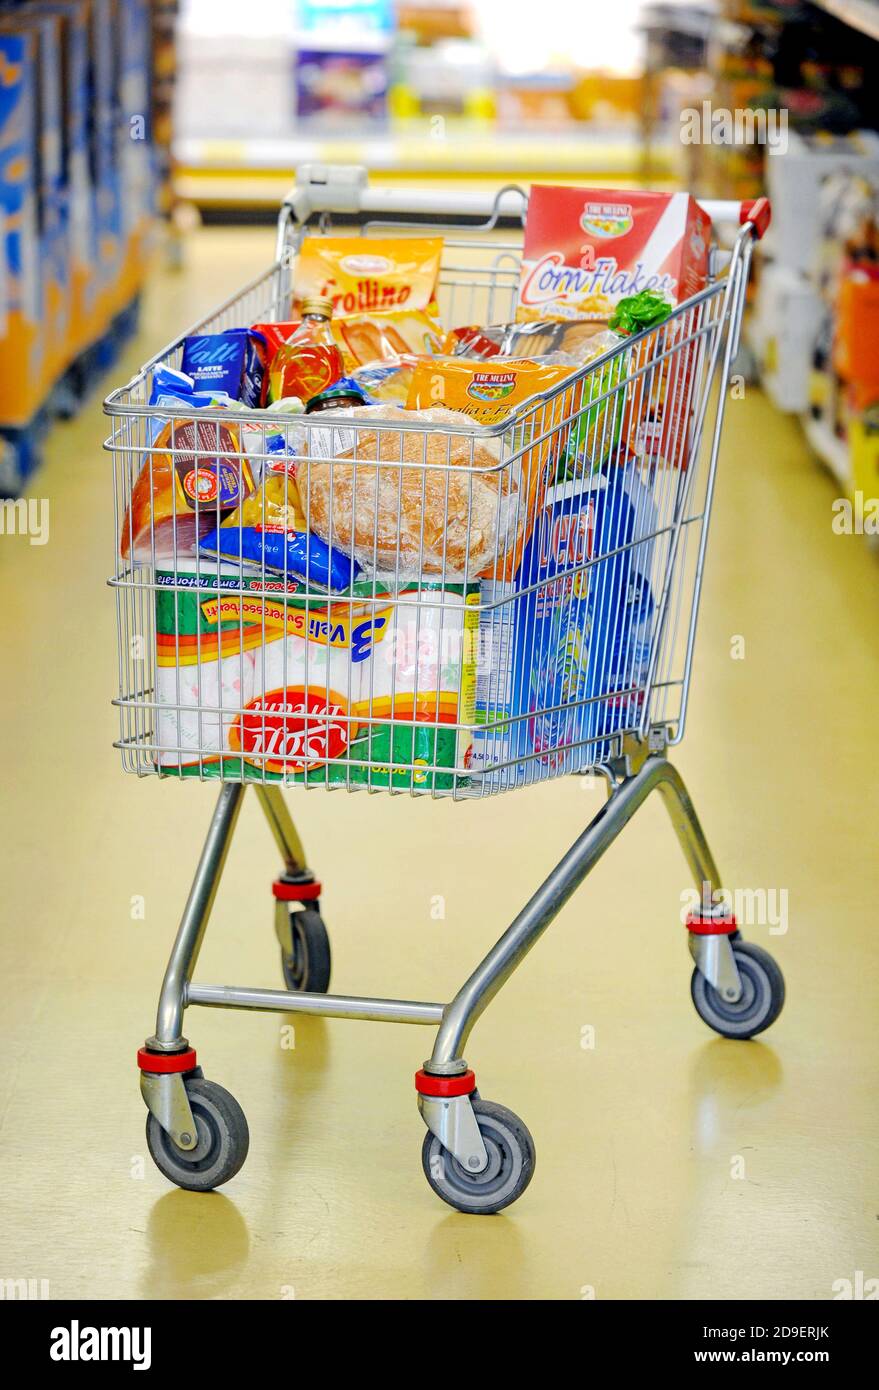 Shopping cart full in a supermarket. Stock Photo